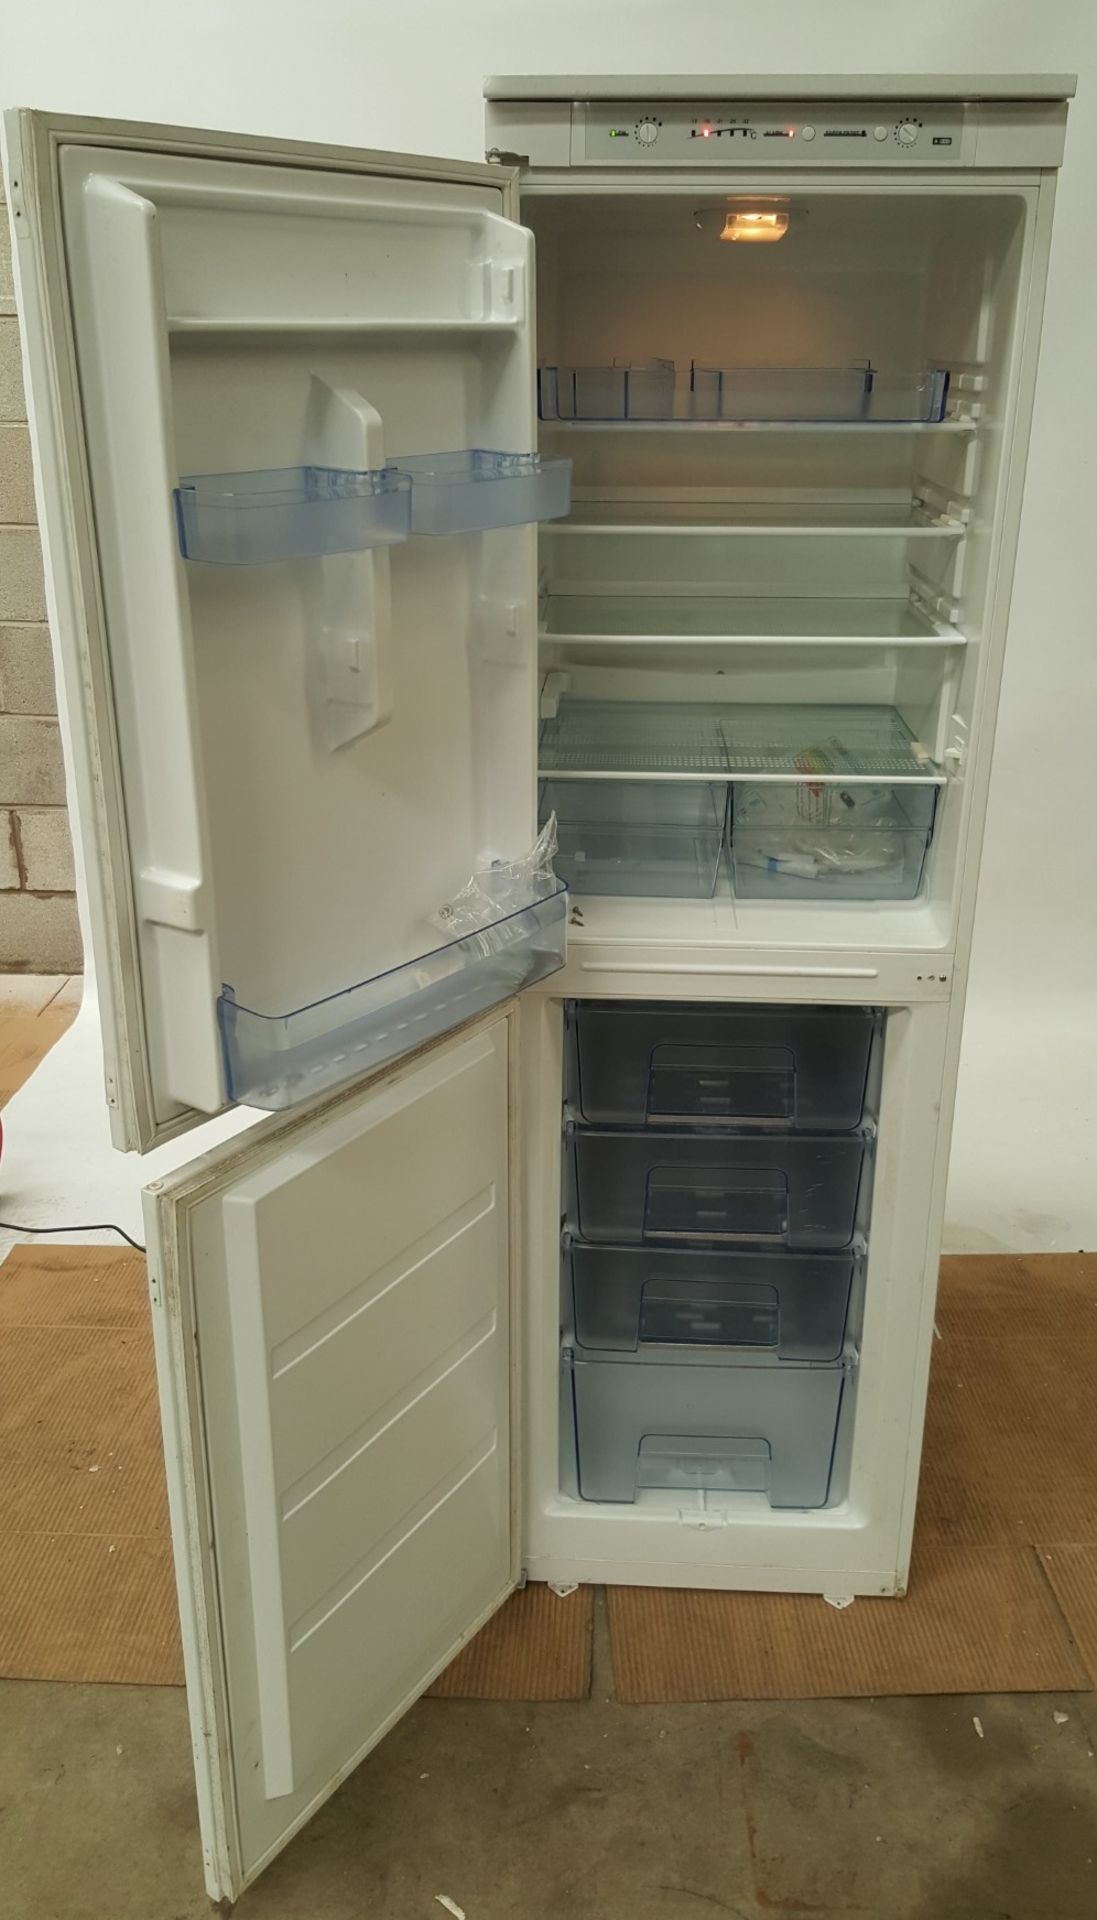 1 x Prima Integrated 60/40 Frost Free Fridge Freezer LPR356A1 - Ref BY189 - Image 5 of 7